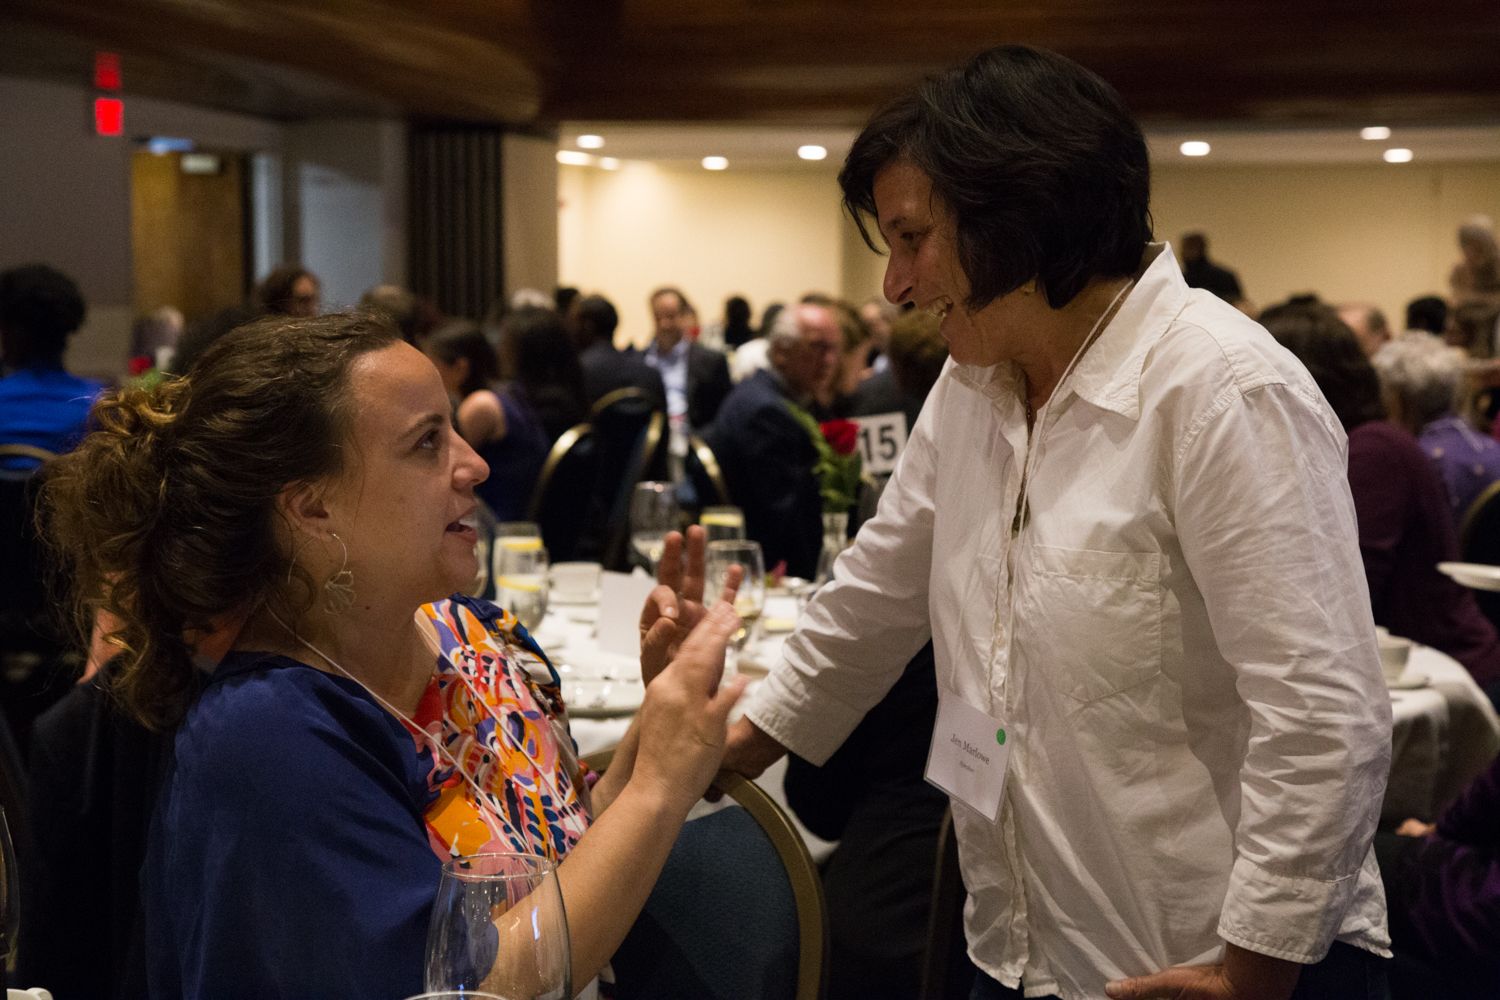 Jina Moore, East Africa Bureau Chief for The New York Times, and filmmaker Jen Marlowe converse during a break between dinner speakers. Image by Lorraine Ustaris. Washington, D.C., 2018. 